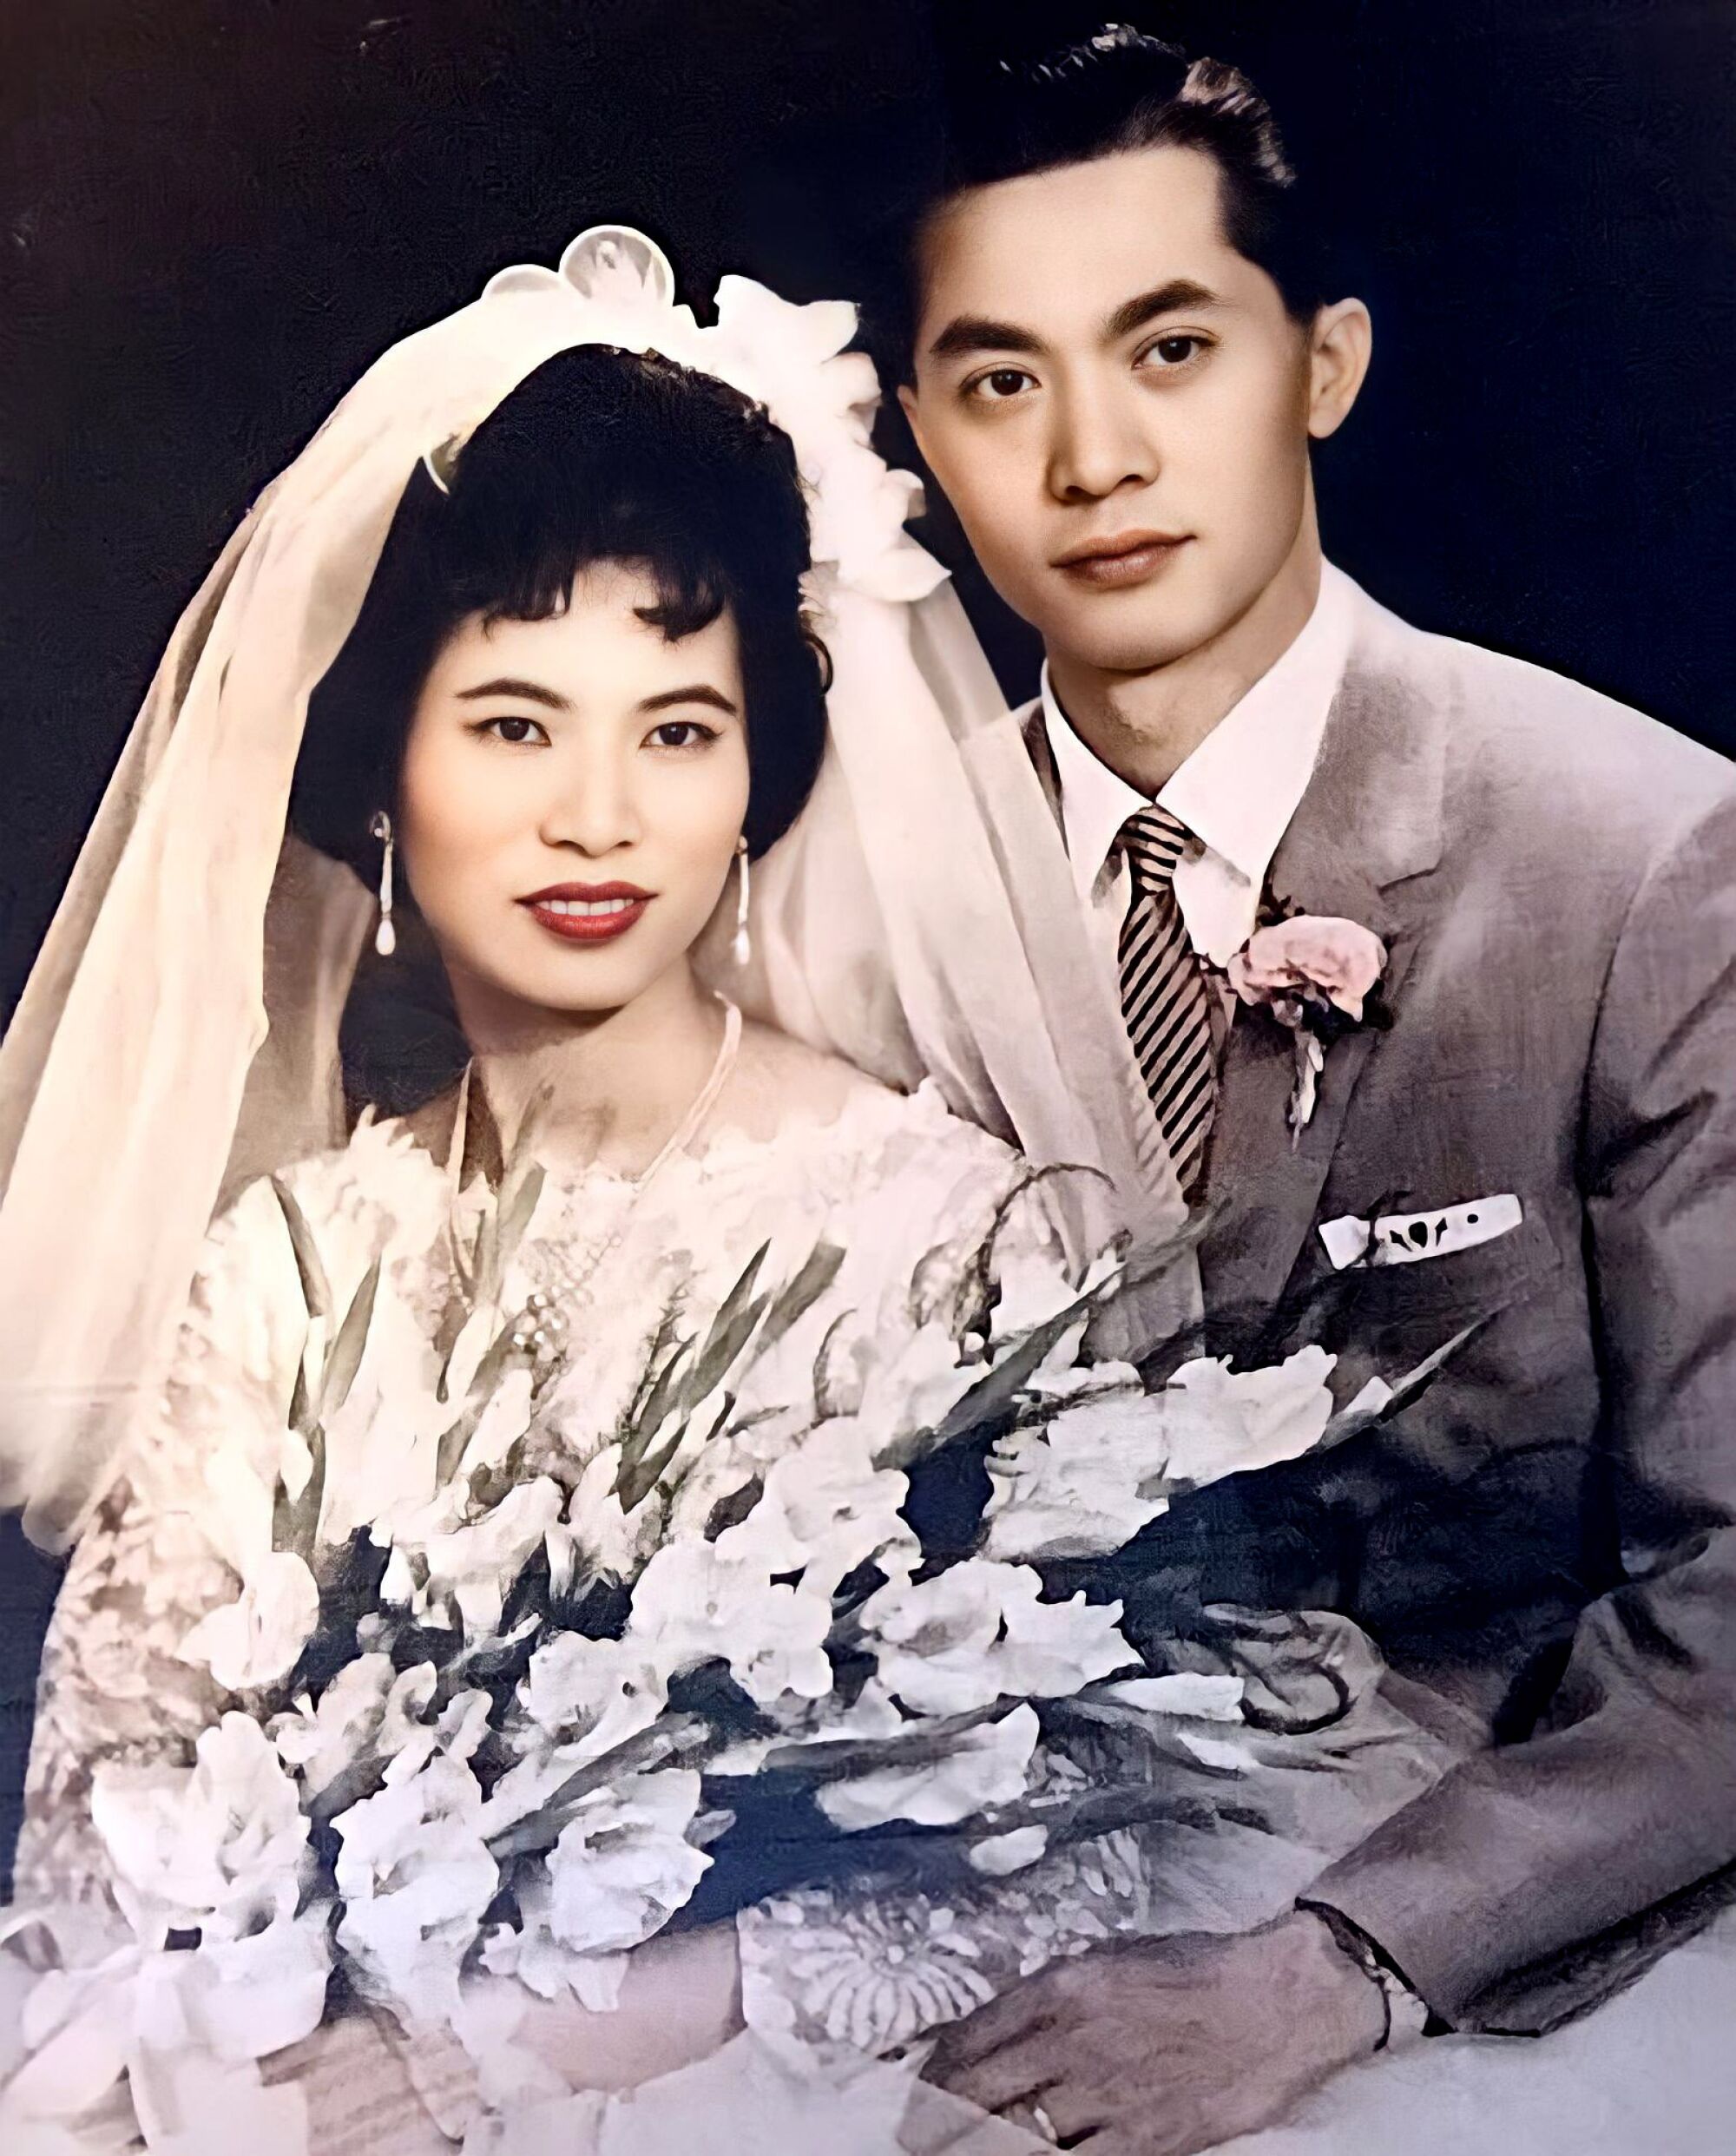 A photo from Ben and Mary Chin's wedding in 1962.